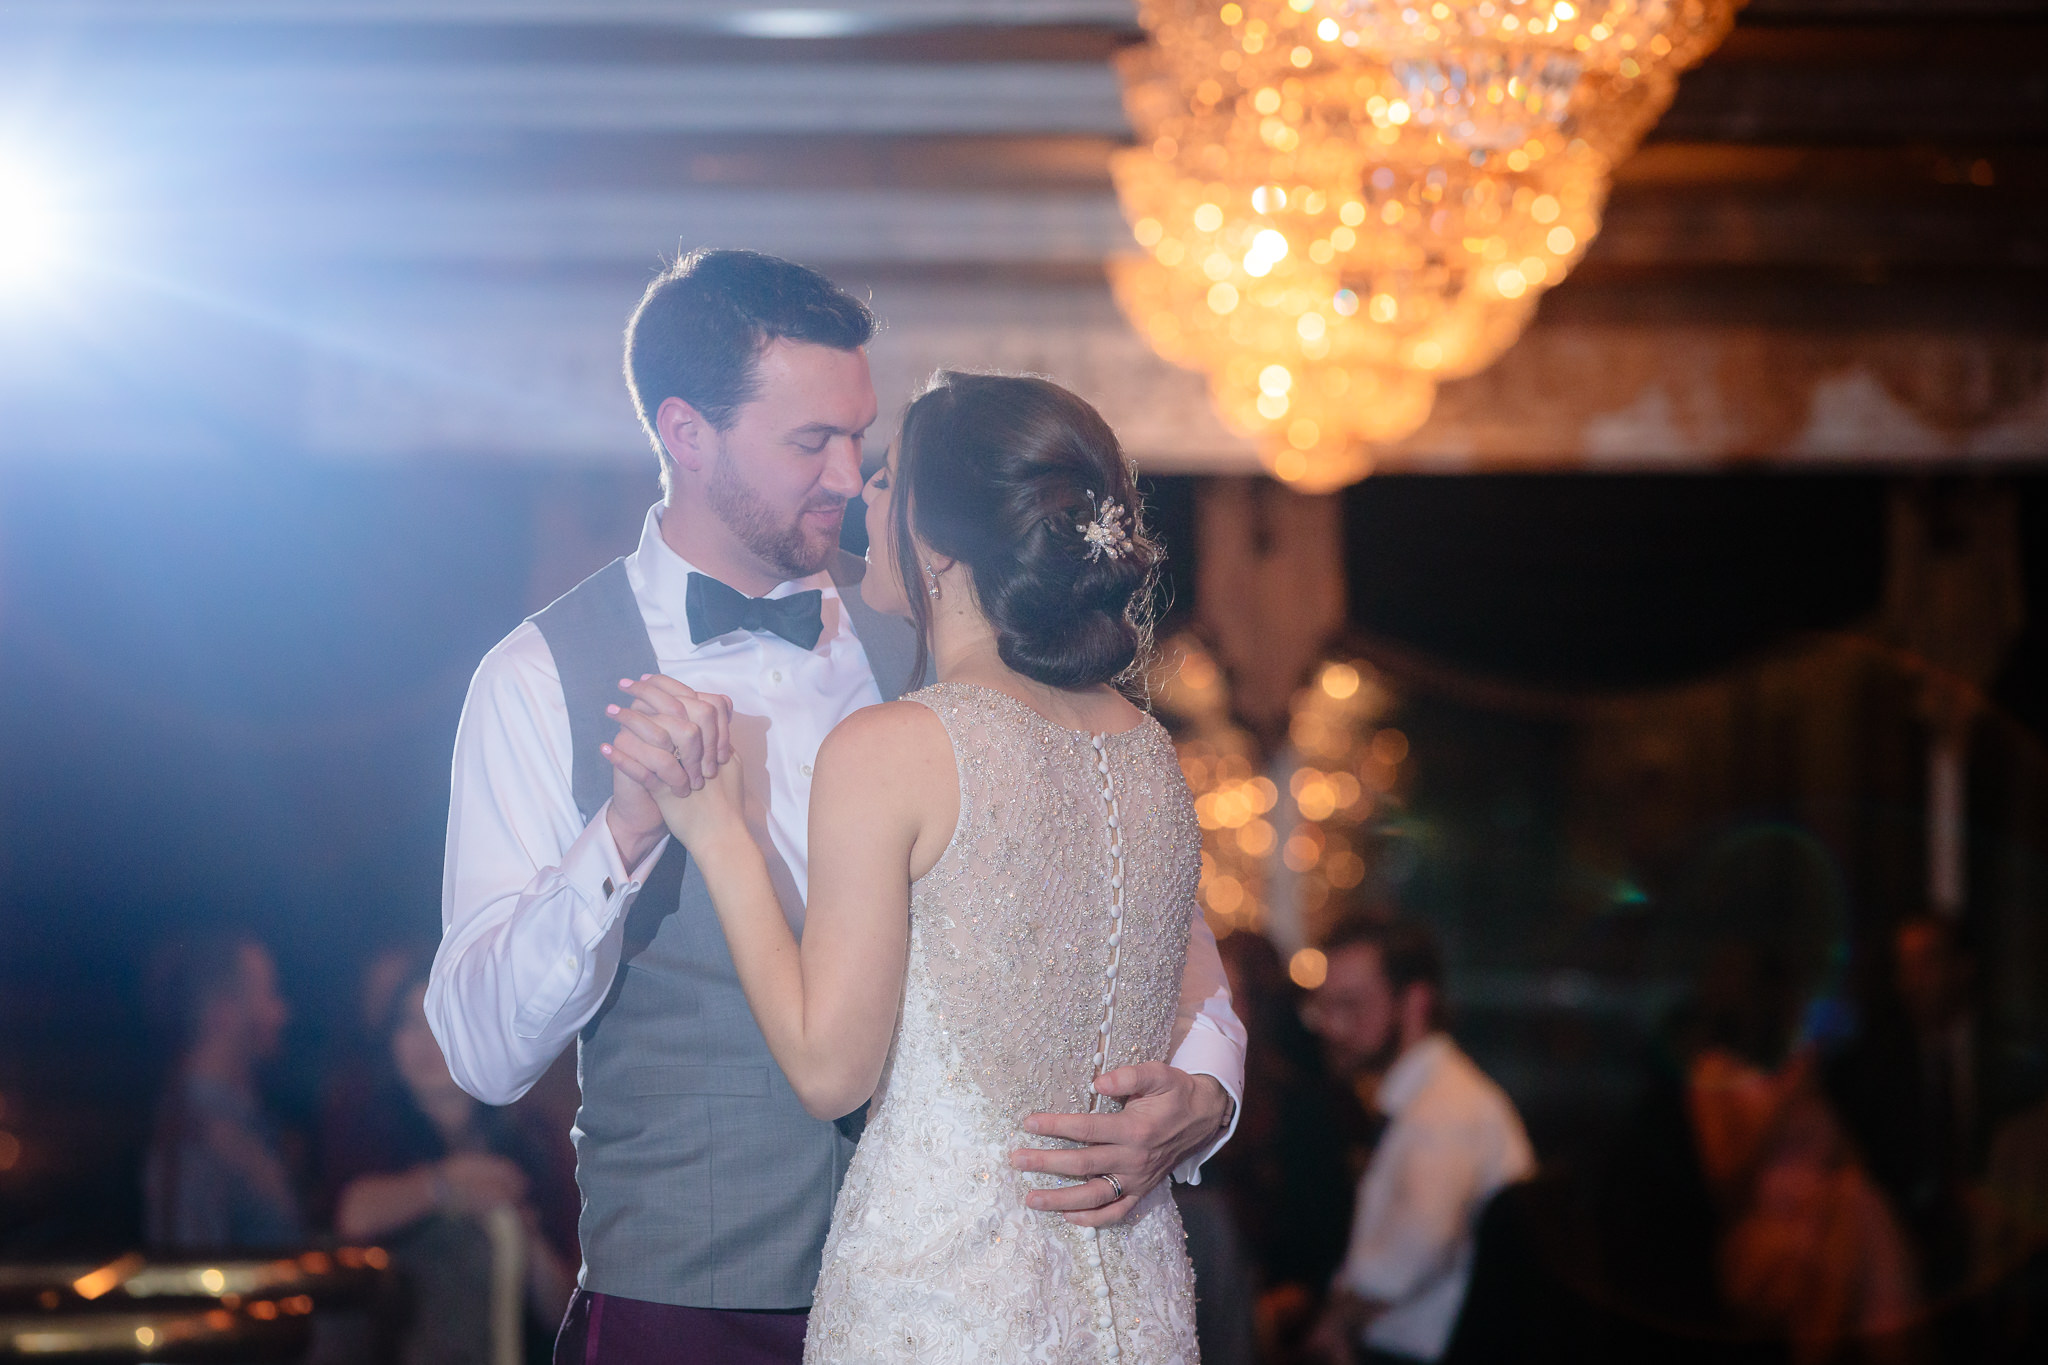 First dance under the chandeliers at the LeMont